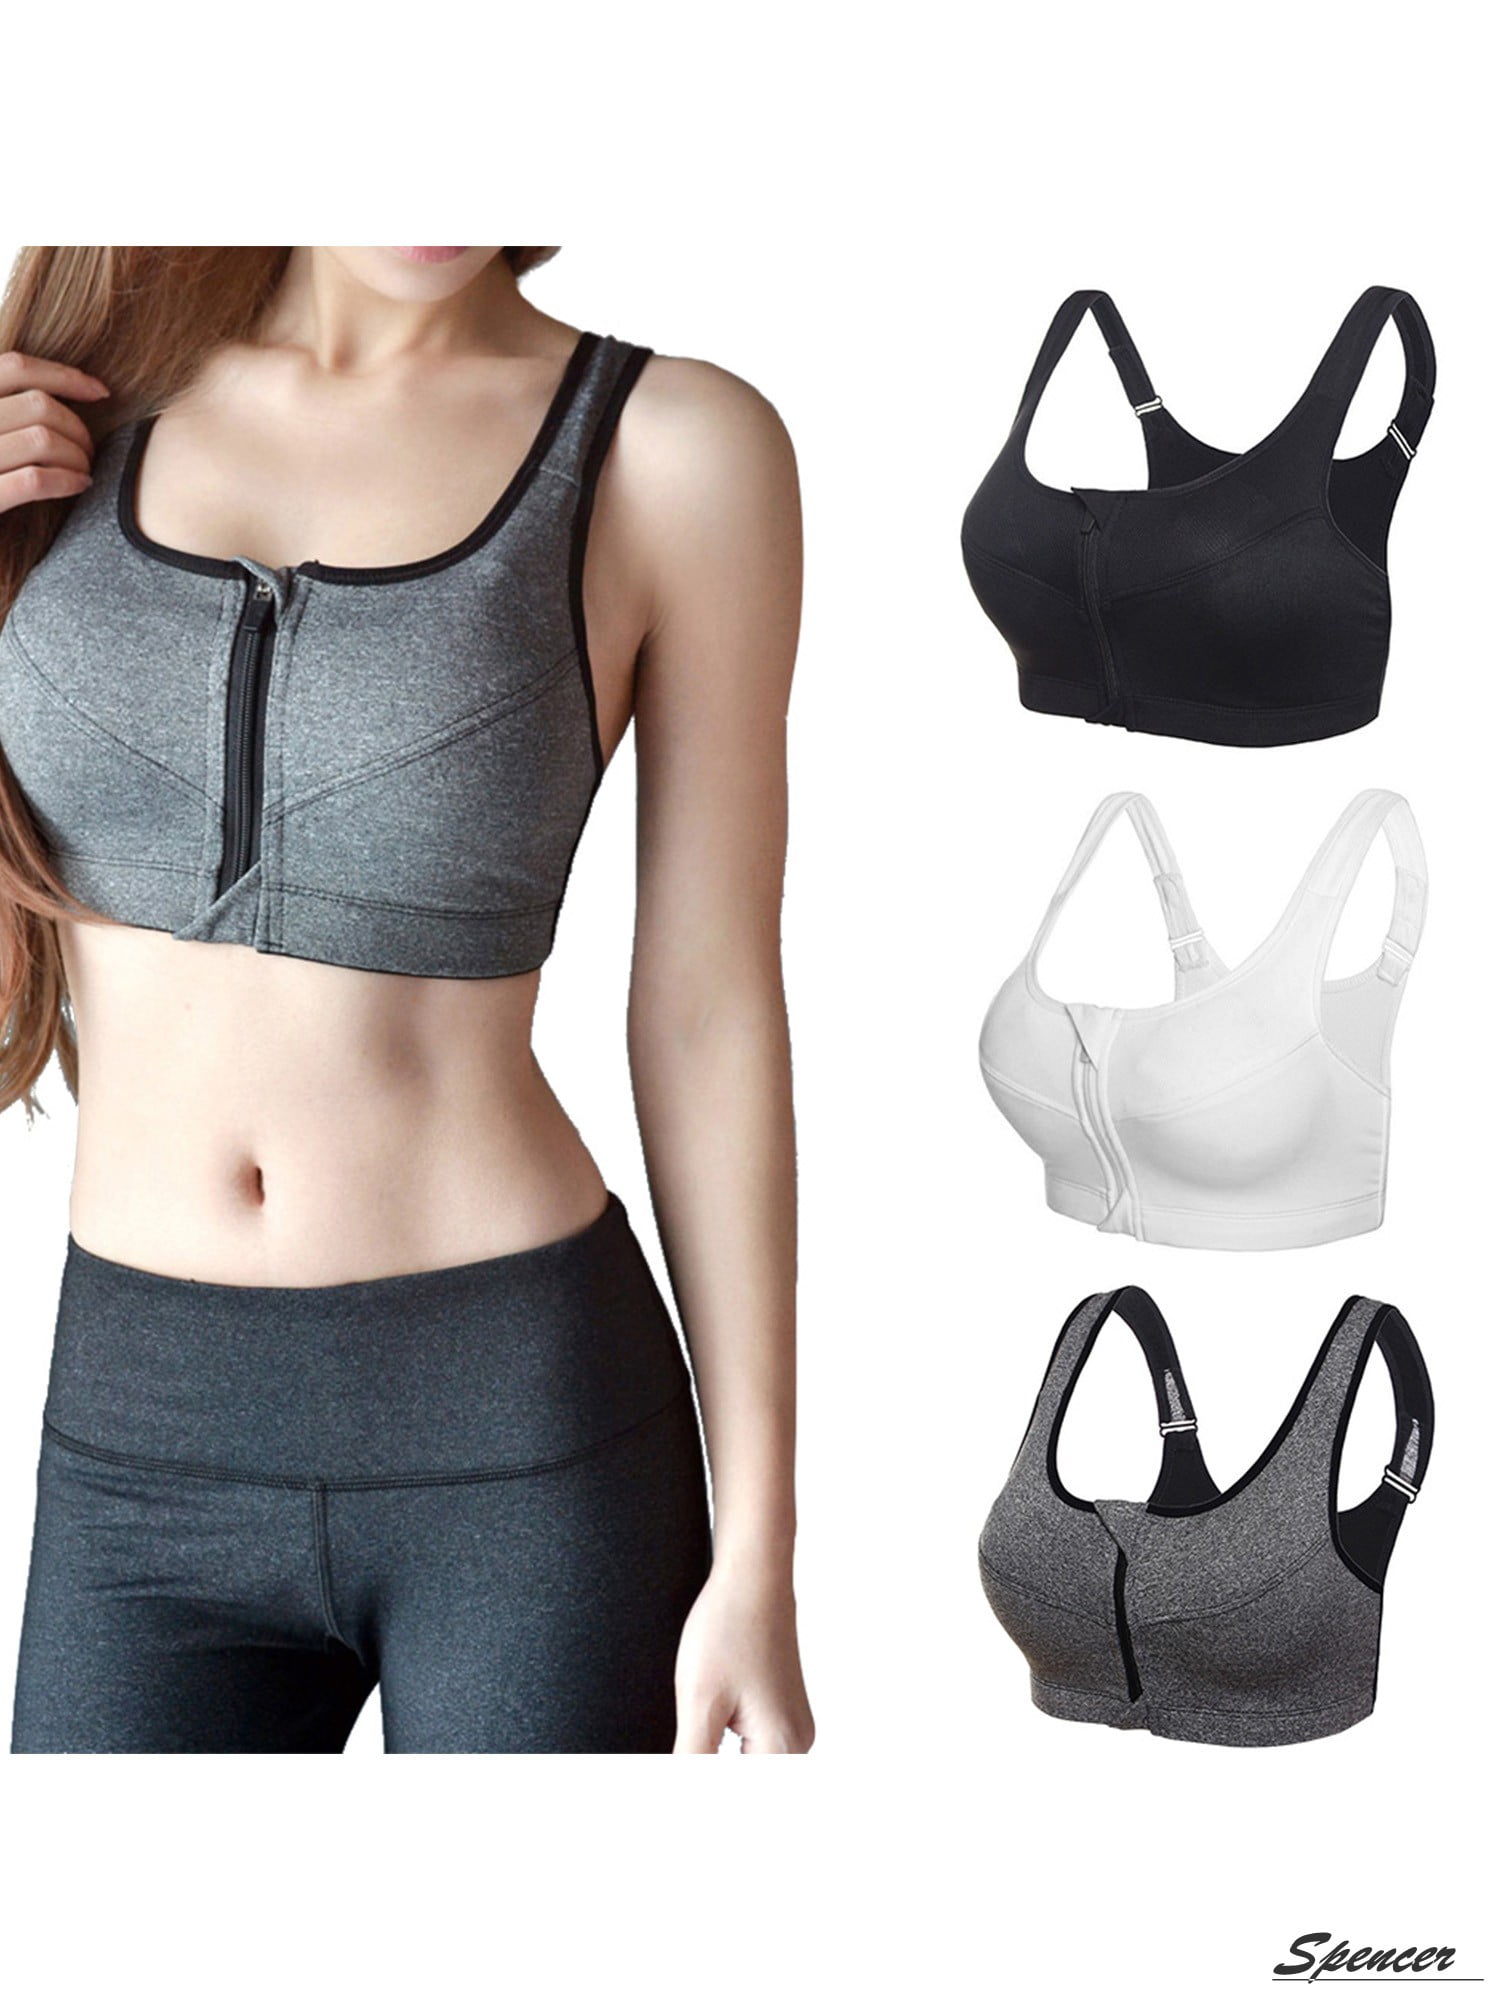 Padded Sports Bras for Women Front Closure High Impact Bralettes Workout Fitness Yoga Bras Racerback Cami Crop Top